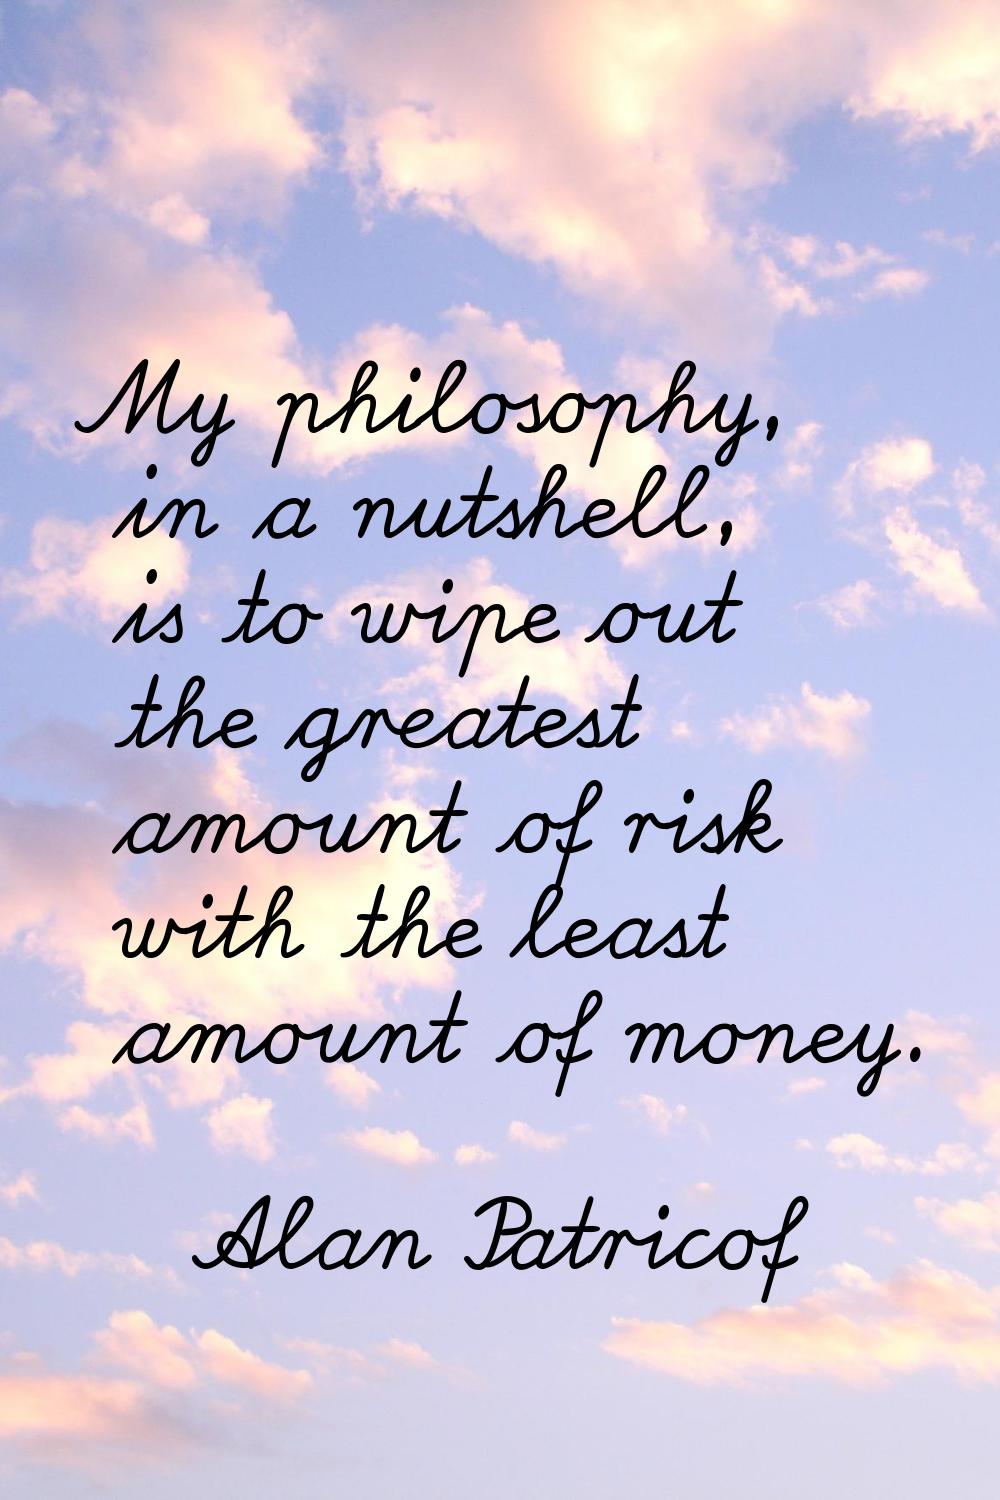 My philosophy, in a nutshell, is to wipe out the greatest amount of risk with the least amount of m